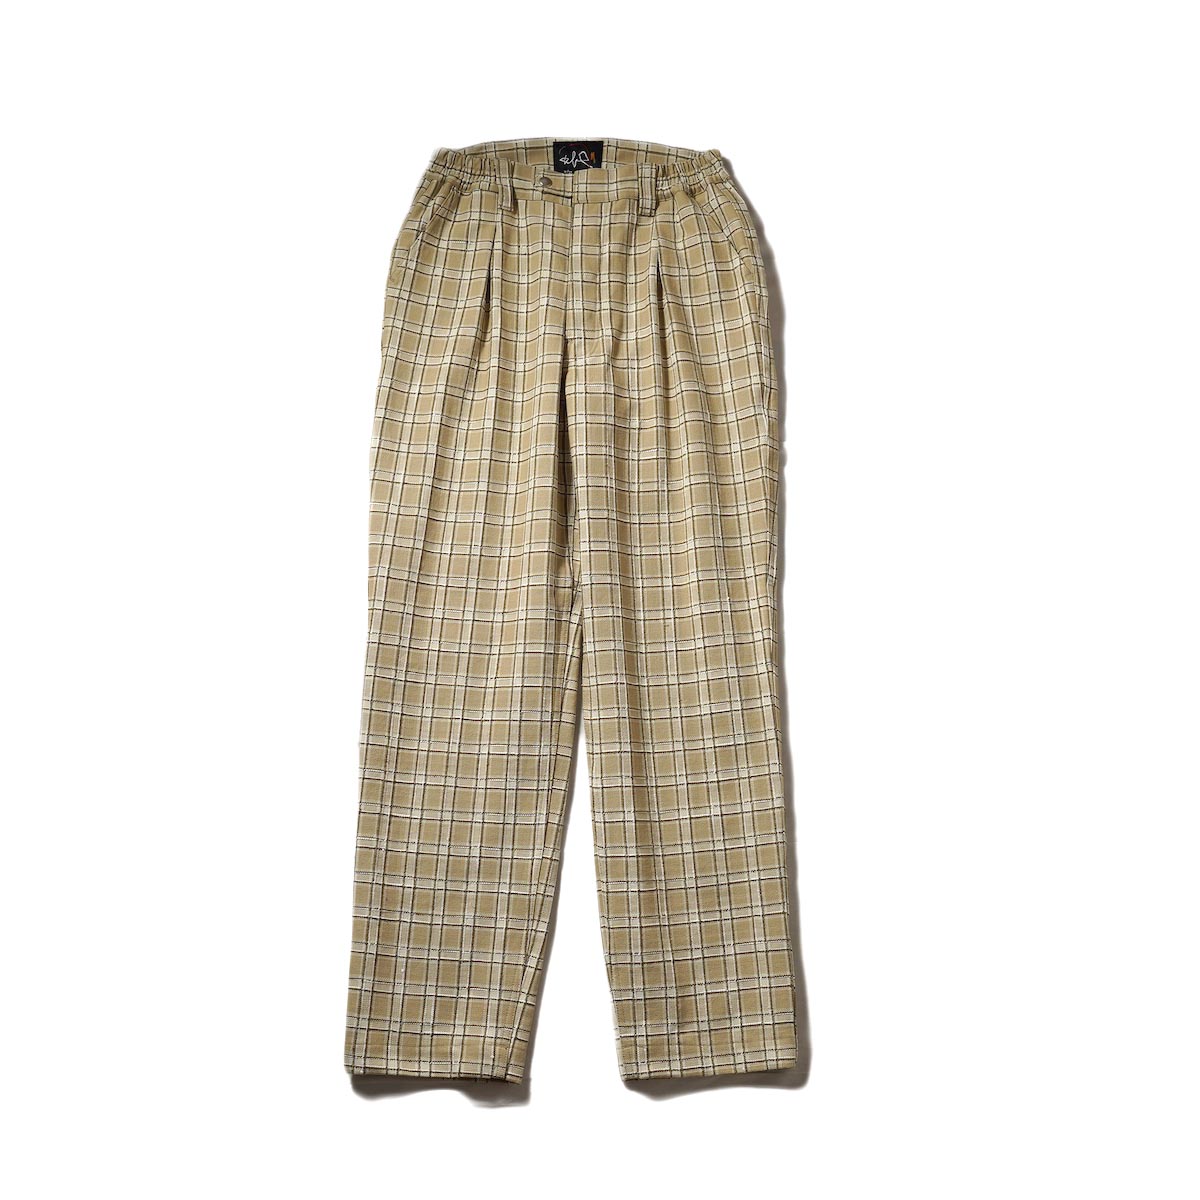 Willow Pants / P-008 - Dead Stock Beige Check Pants 正面